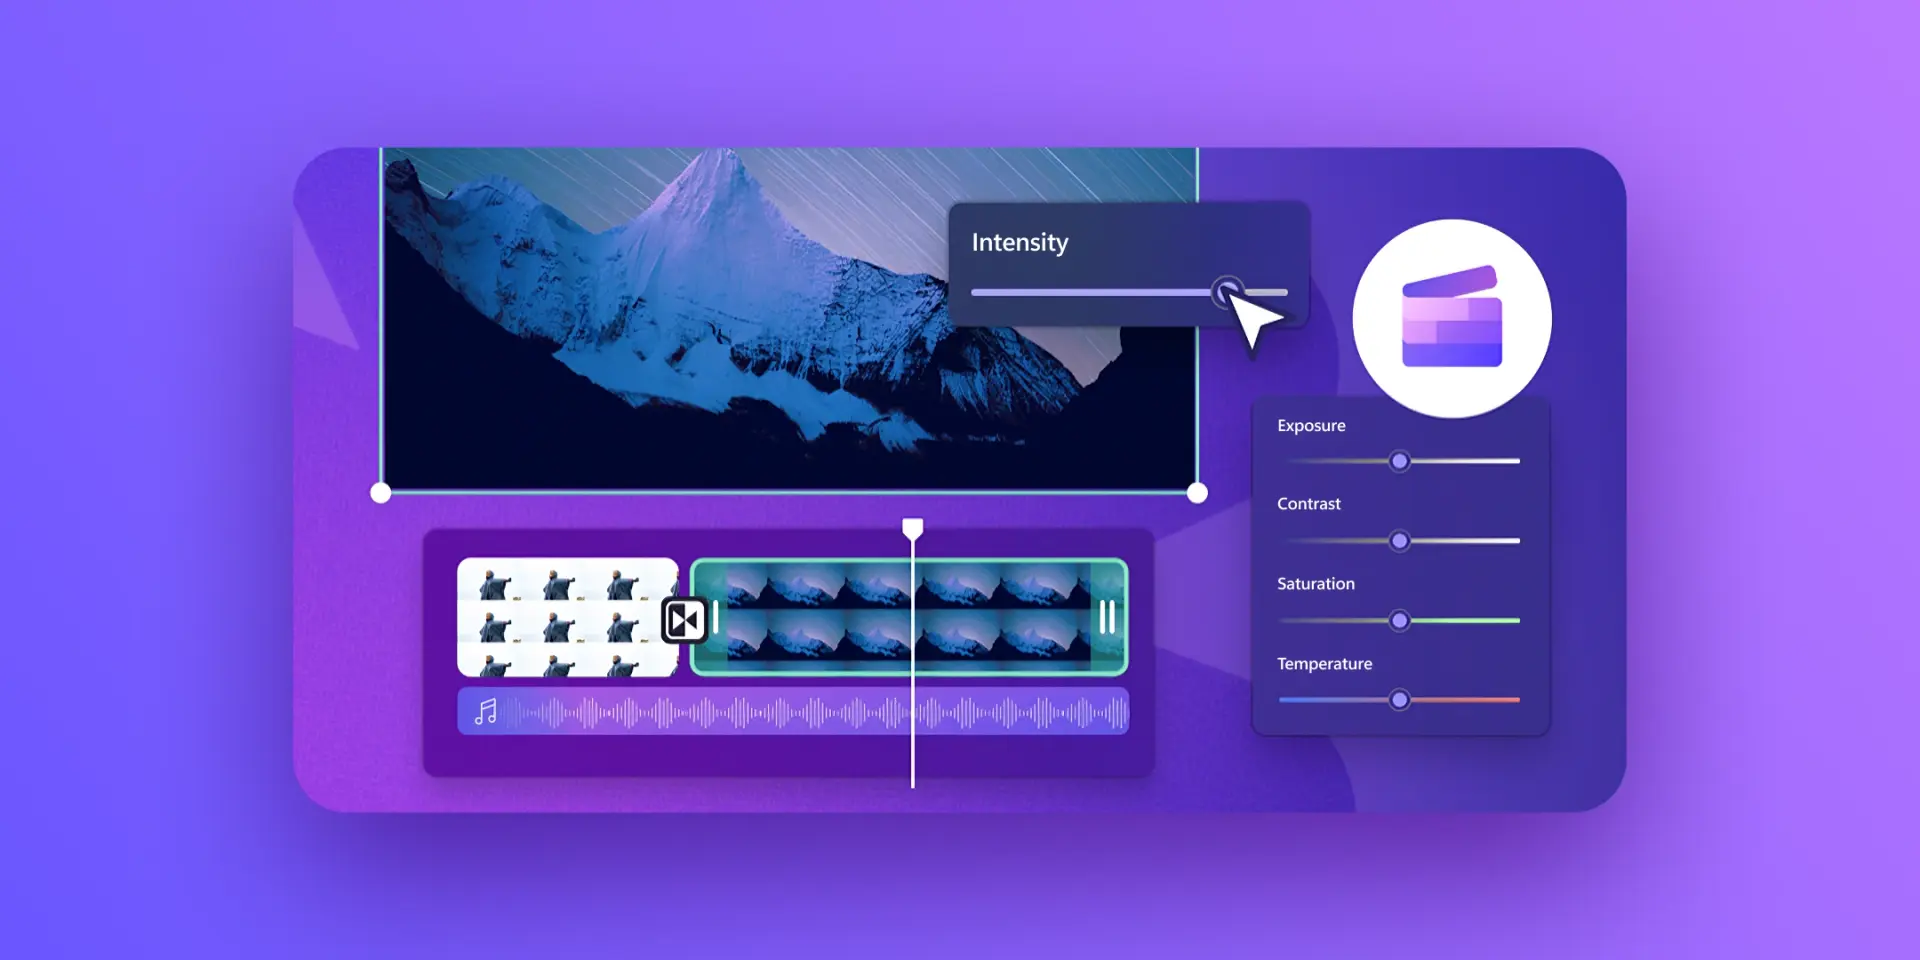 A stylized image of Clipchamp's interface on a purple background